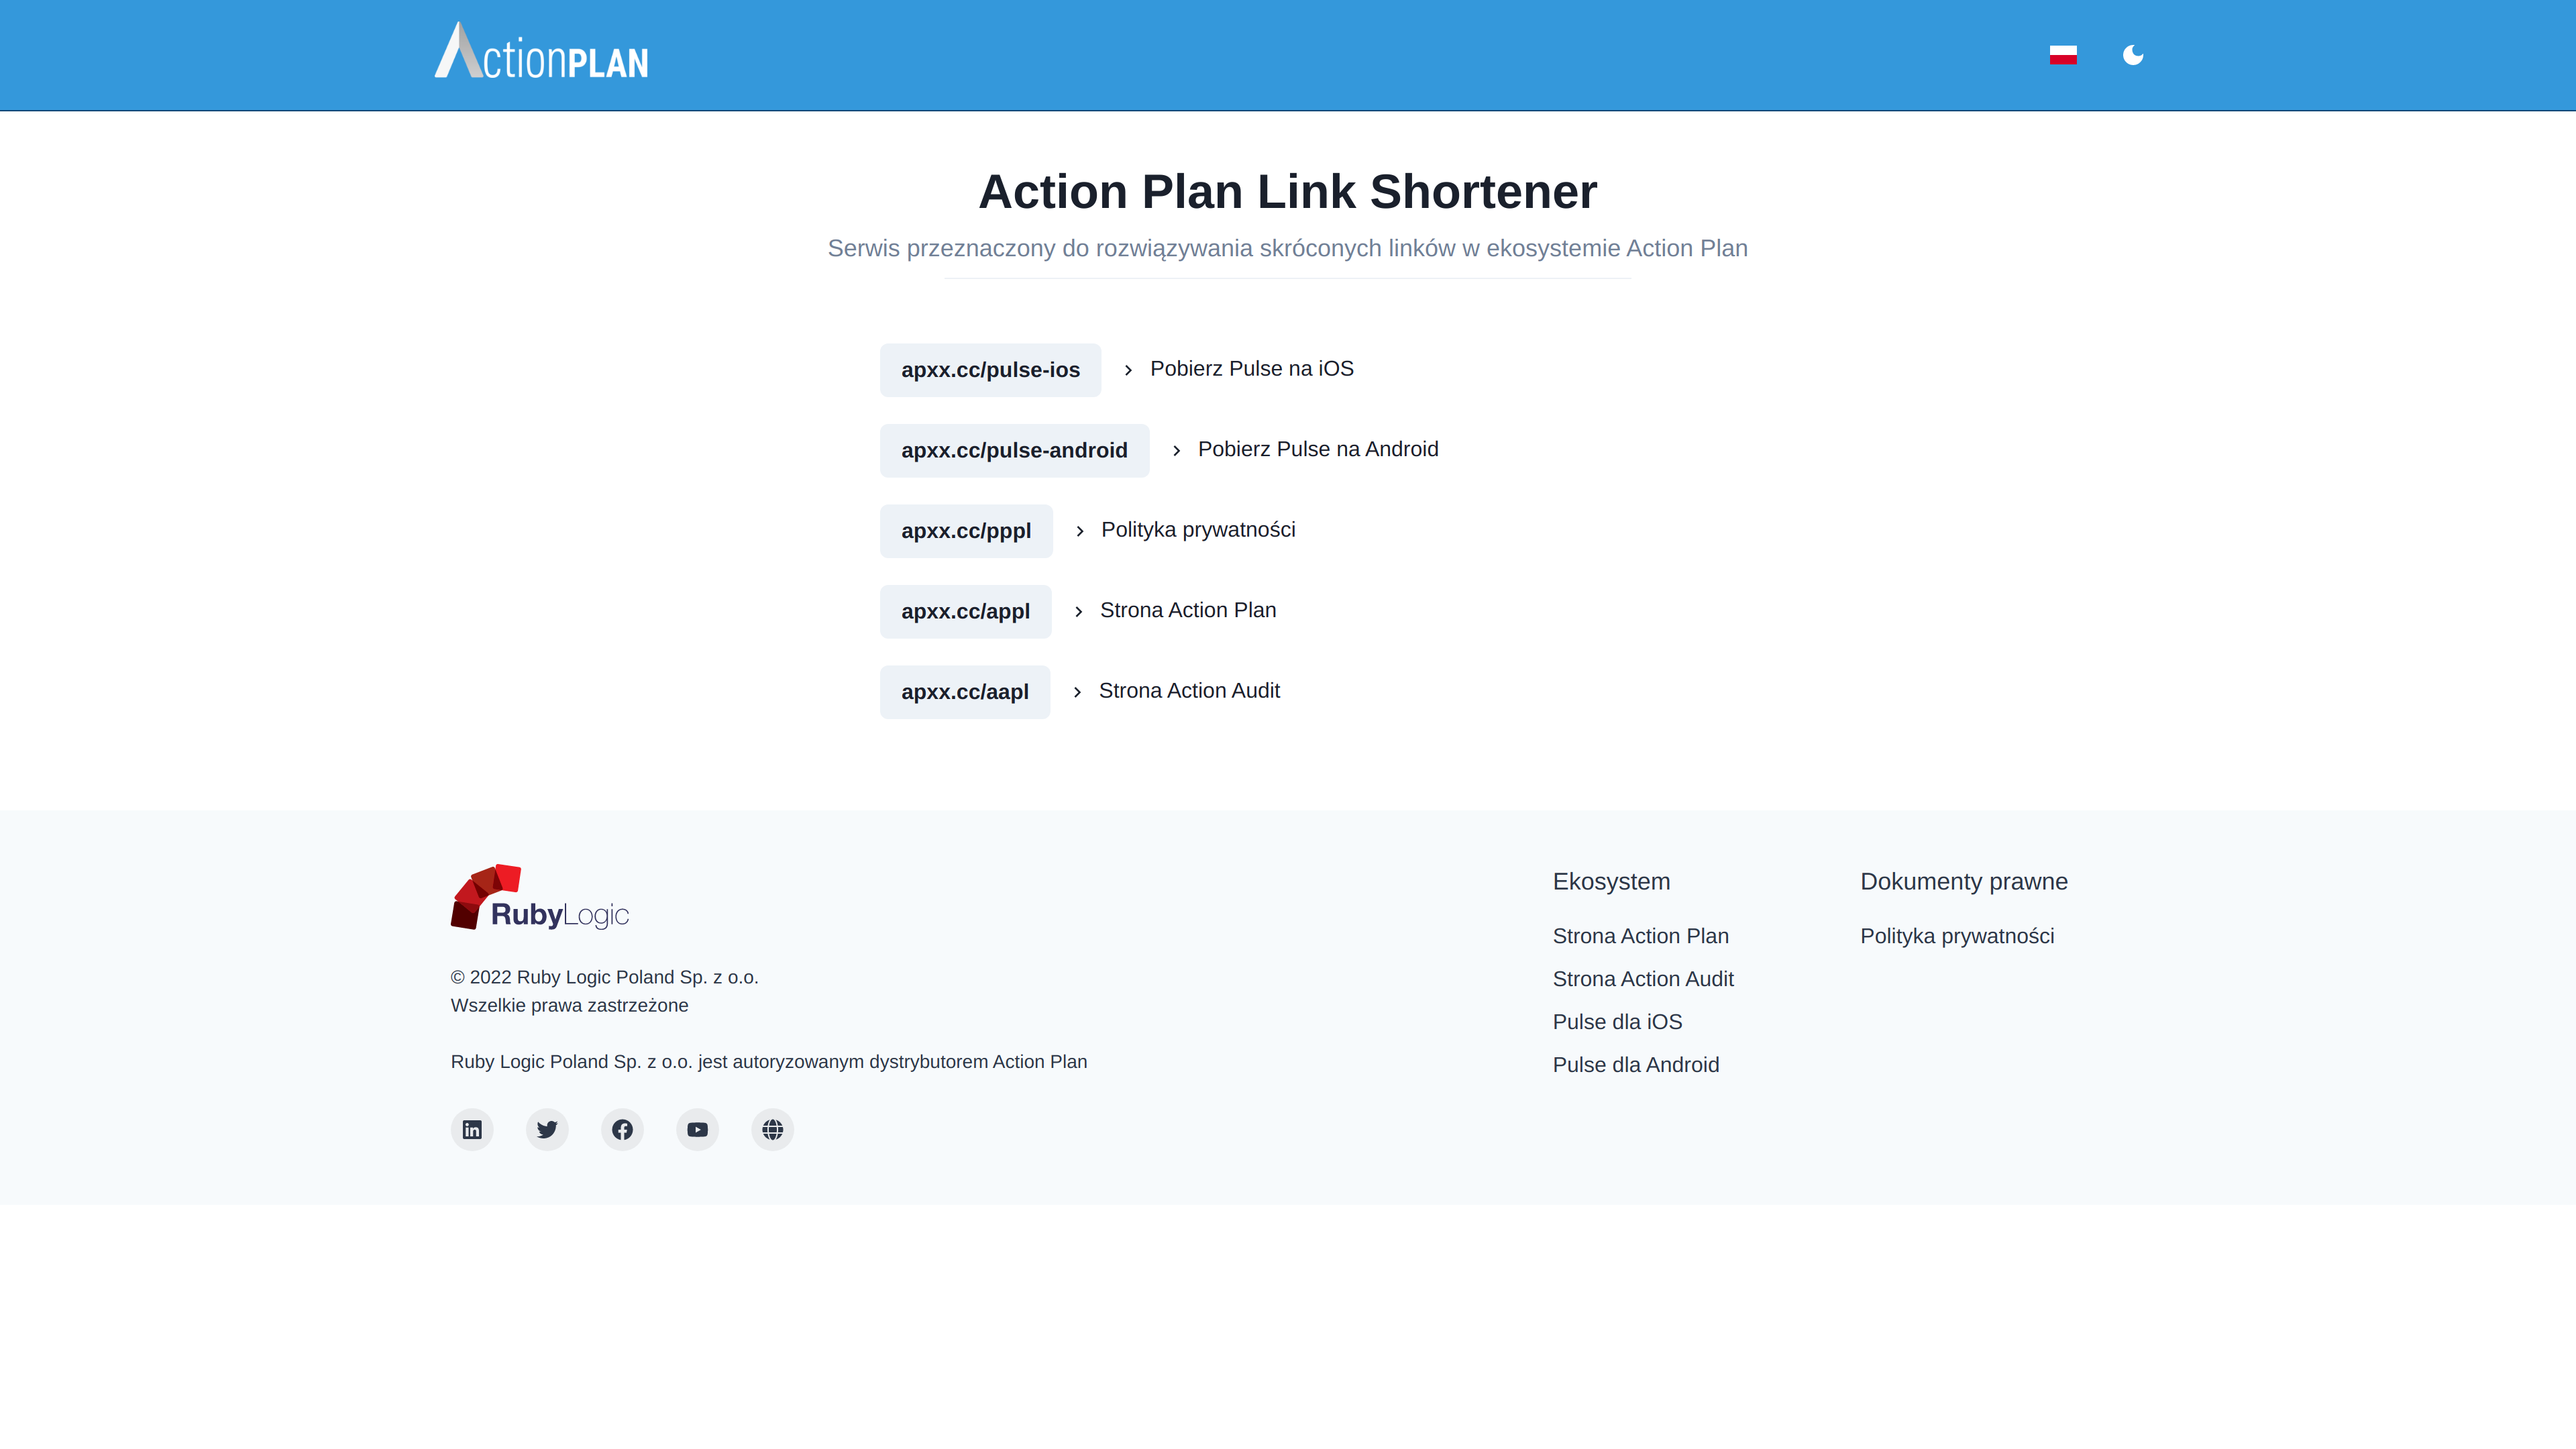 apxx.cc, Shortened links in the Action Plan ecosystem